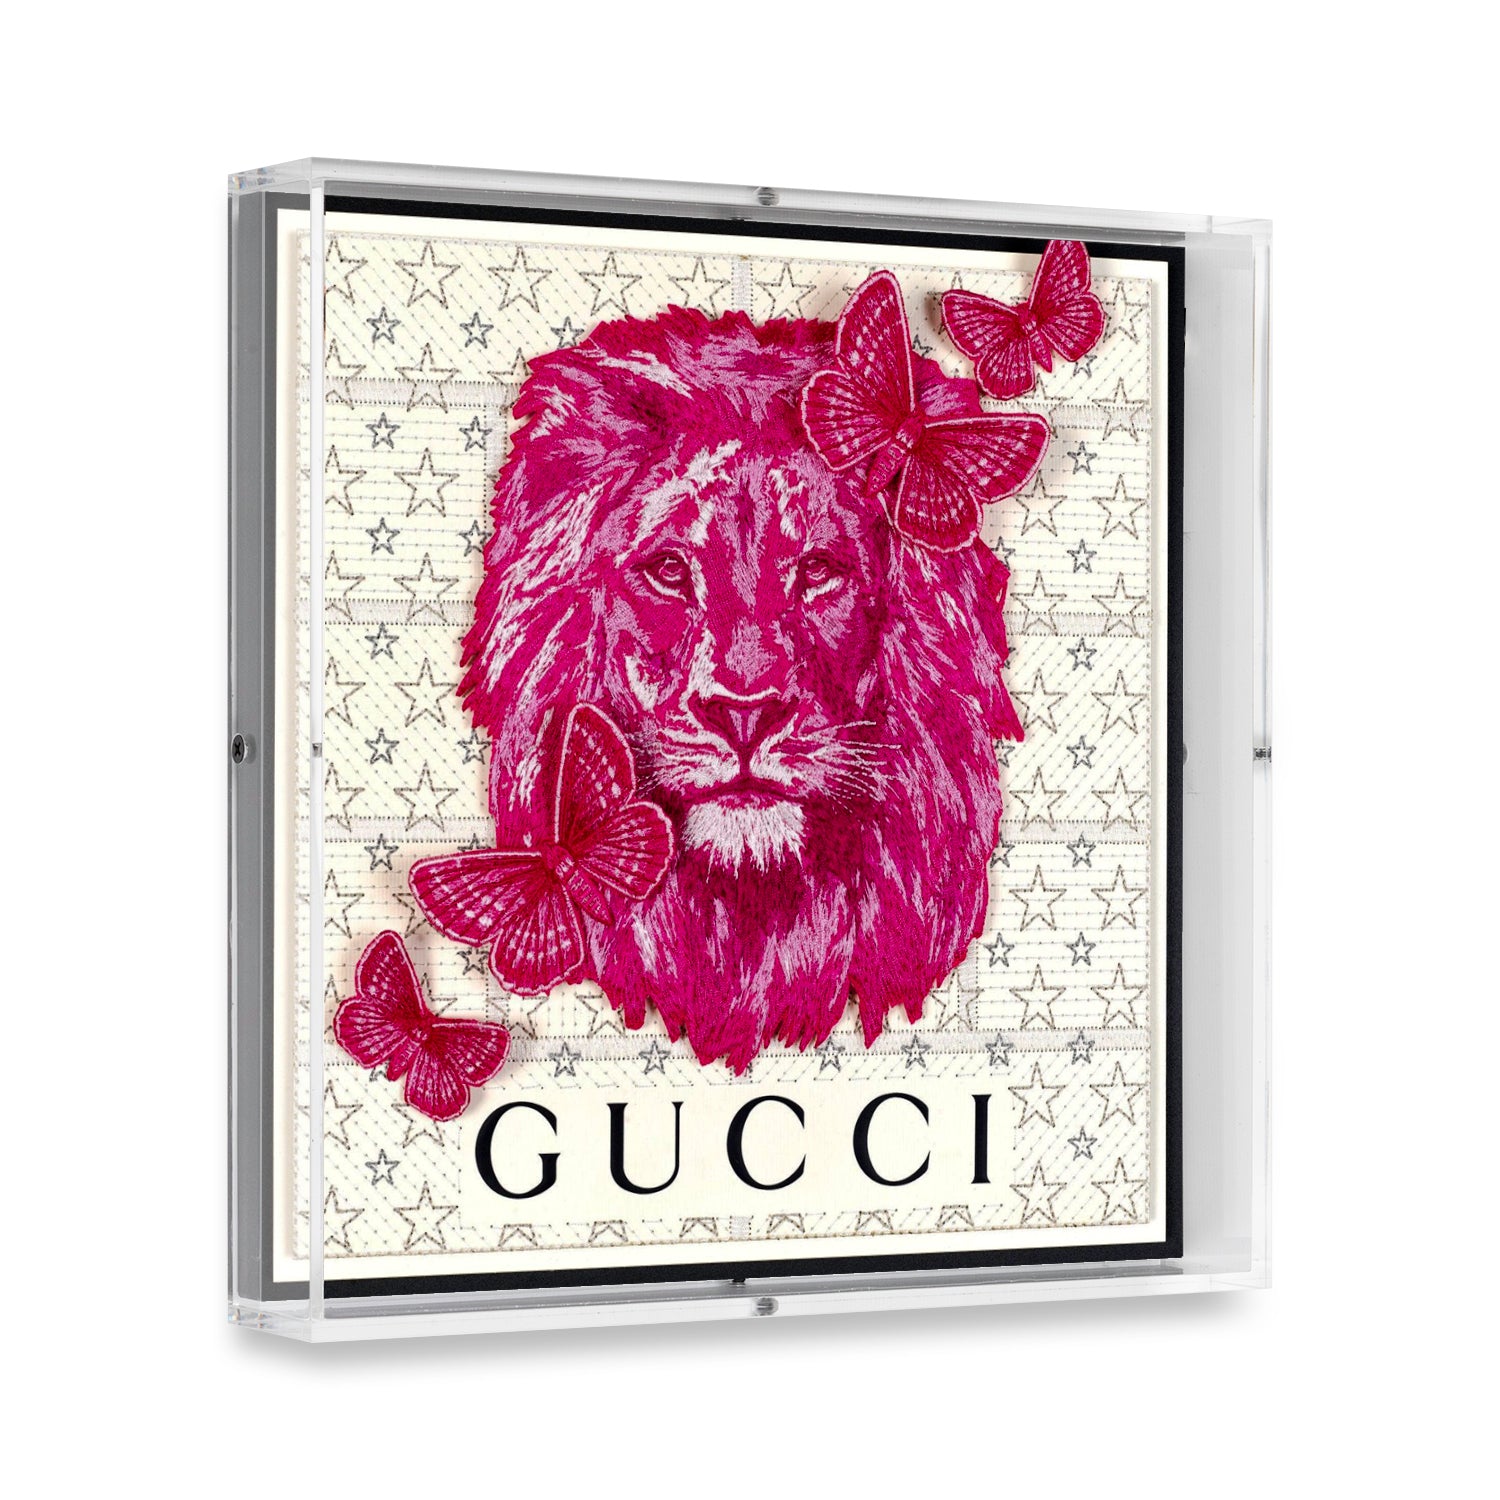 Gucci White Strength by Stephen Wilson (12x12x2